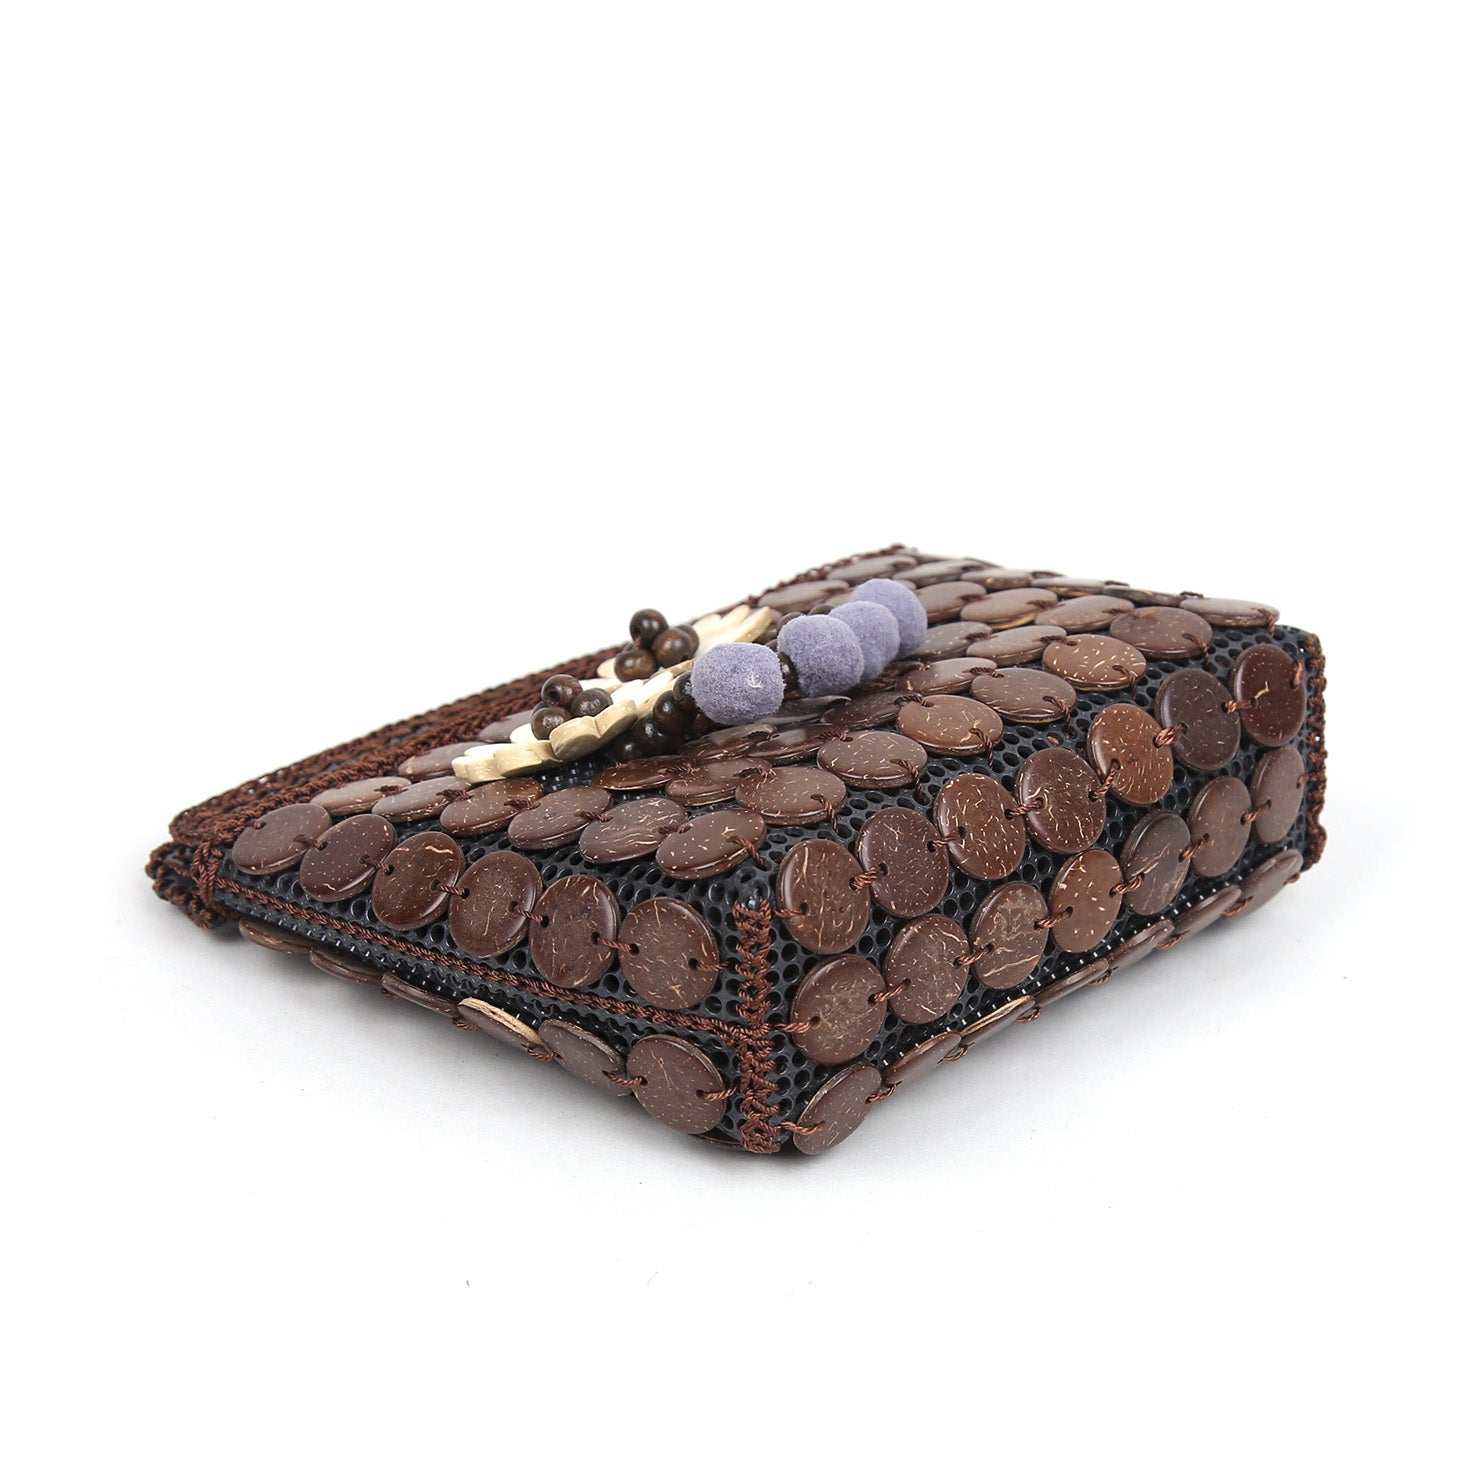 DAISYLIFE Natural and Eco-Friendly Coconut Shell Handbag/Purse/Clutch with Pompoms 